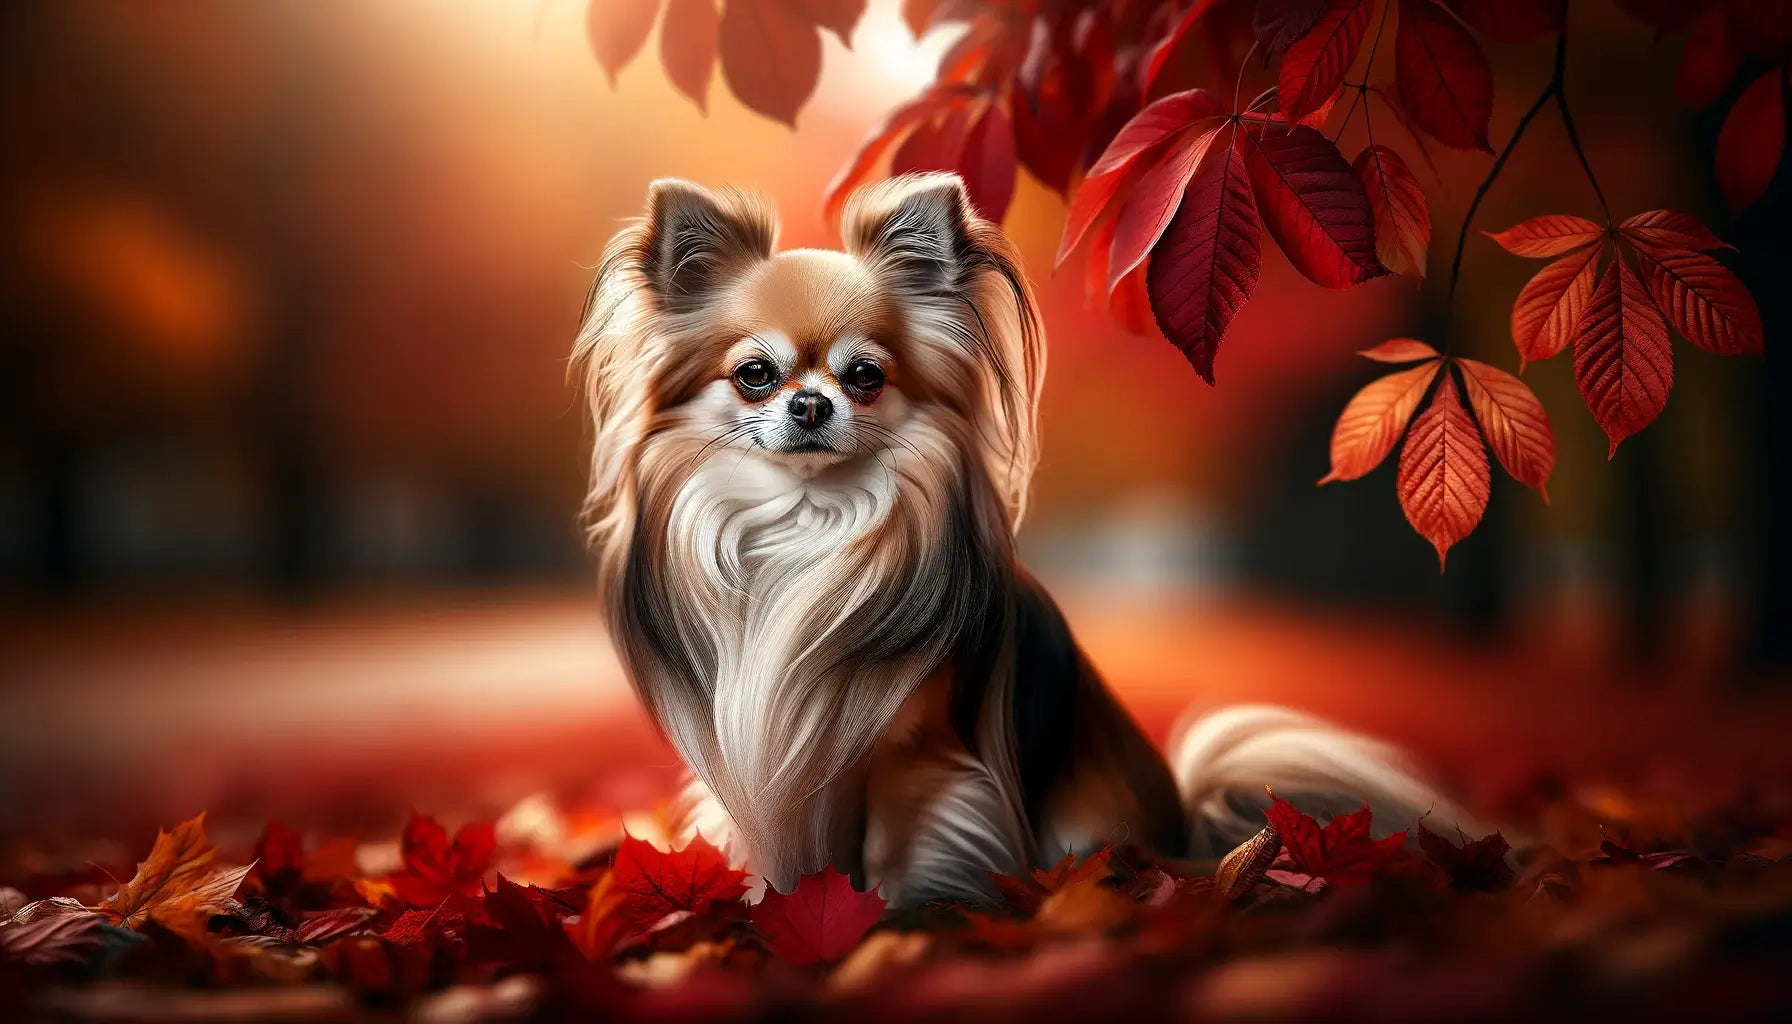 Long-Haired Chihuahua set against a backdrop of fallen leaves, highlighting its elegant flowing coat.